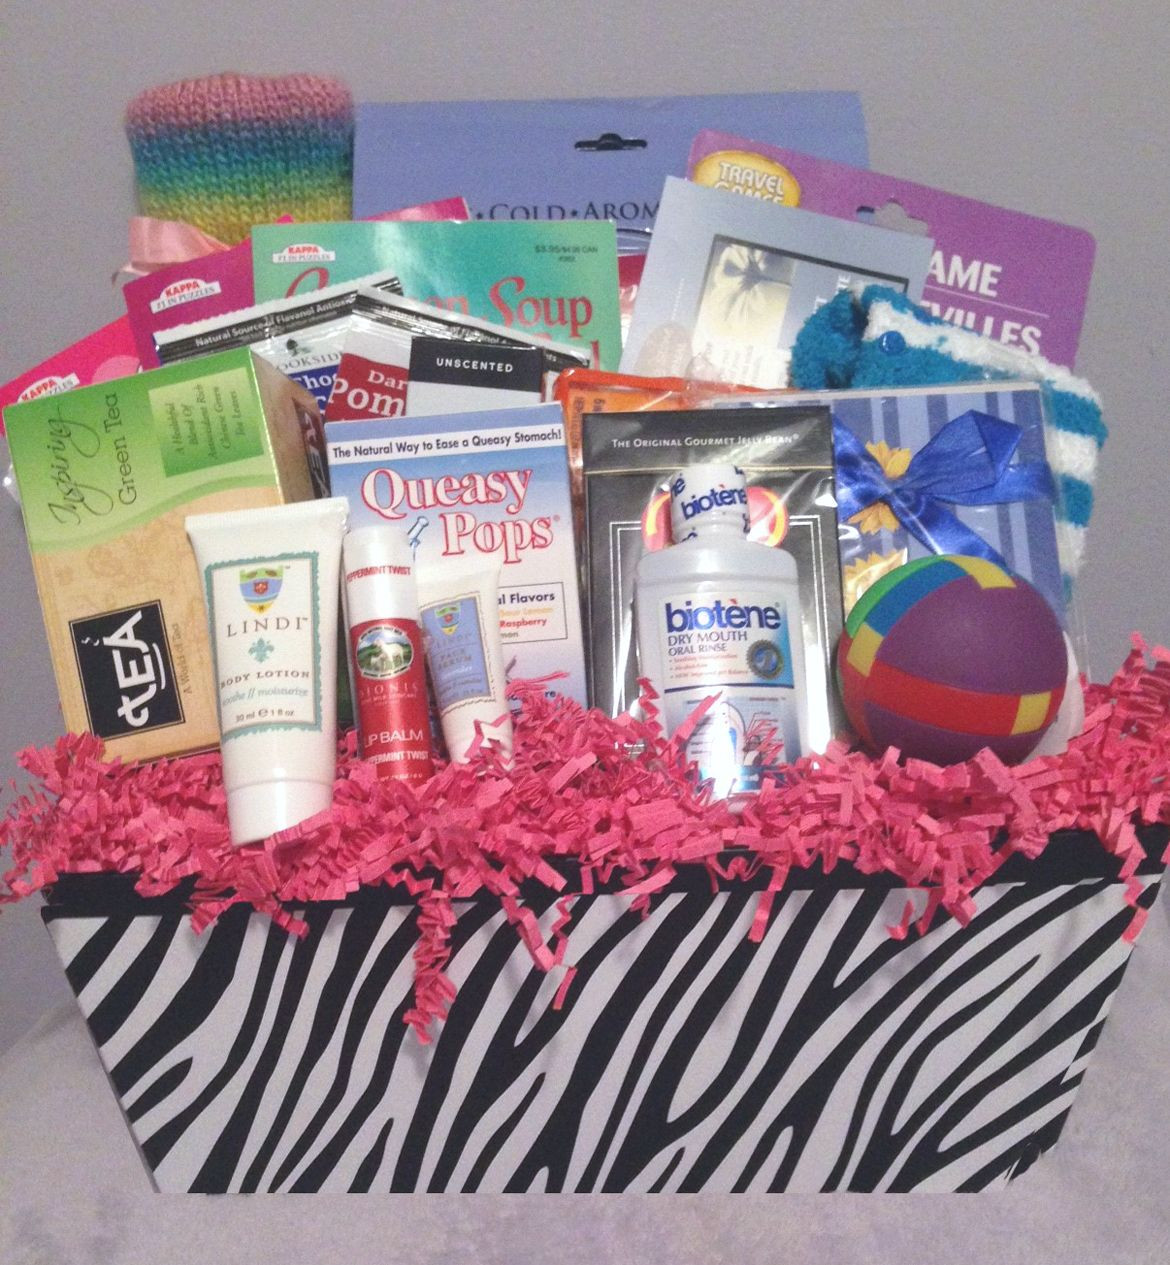 Gift Basket For Cancer Patient Ideas
 Women s Chemo Basket